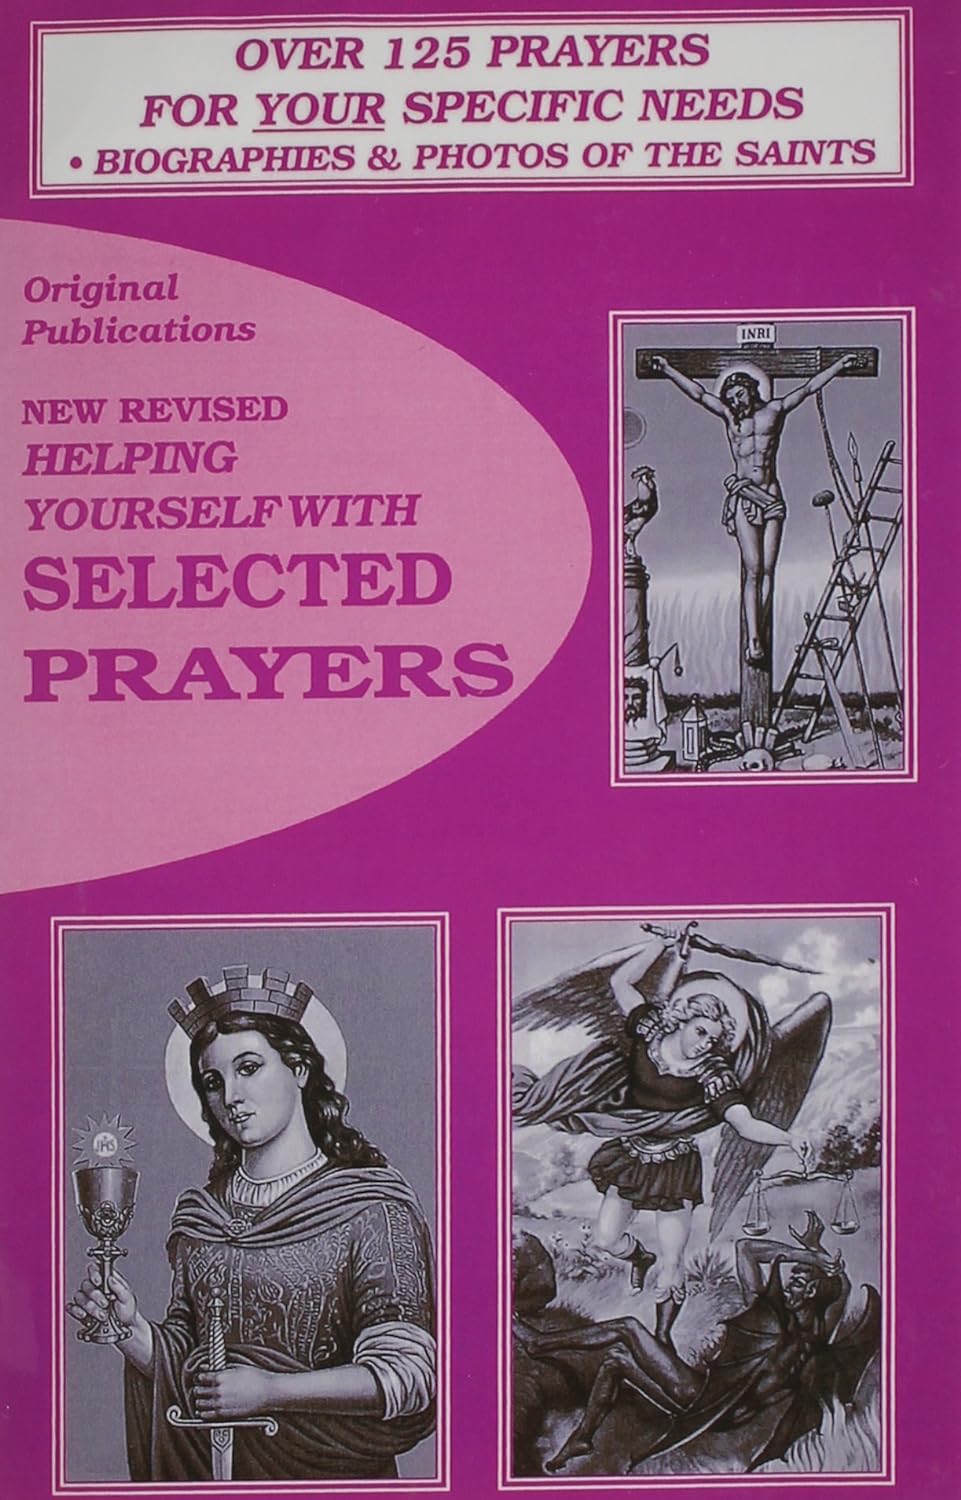 New Revised Helping Yourself With Selected Prayers - Shop Cosmic Healing